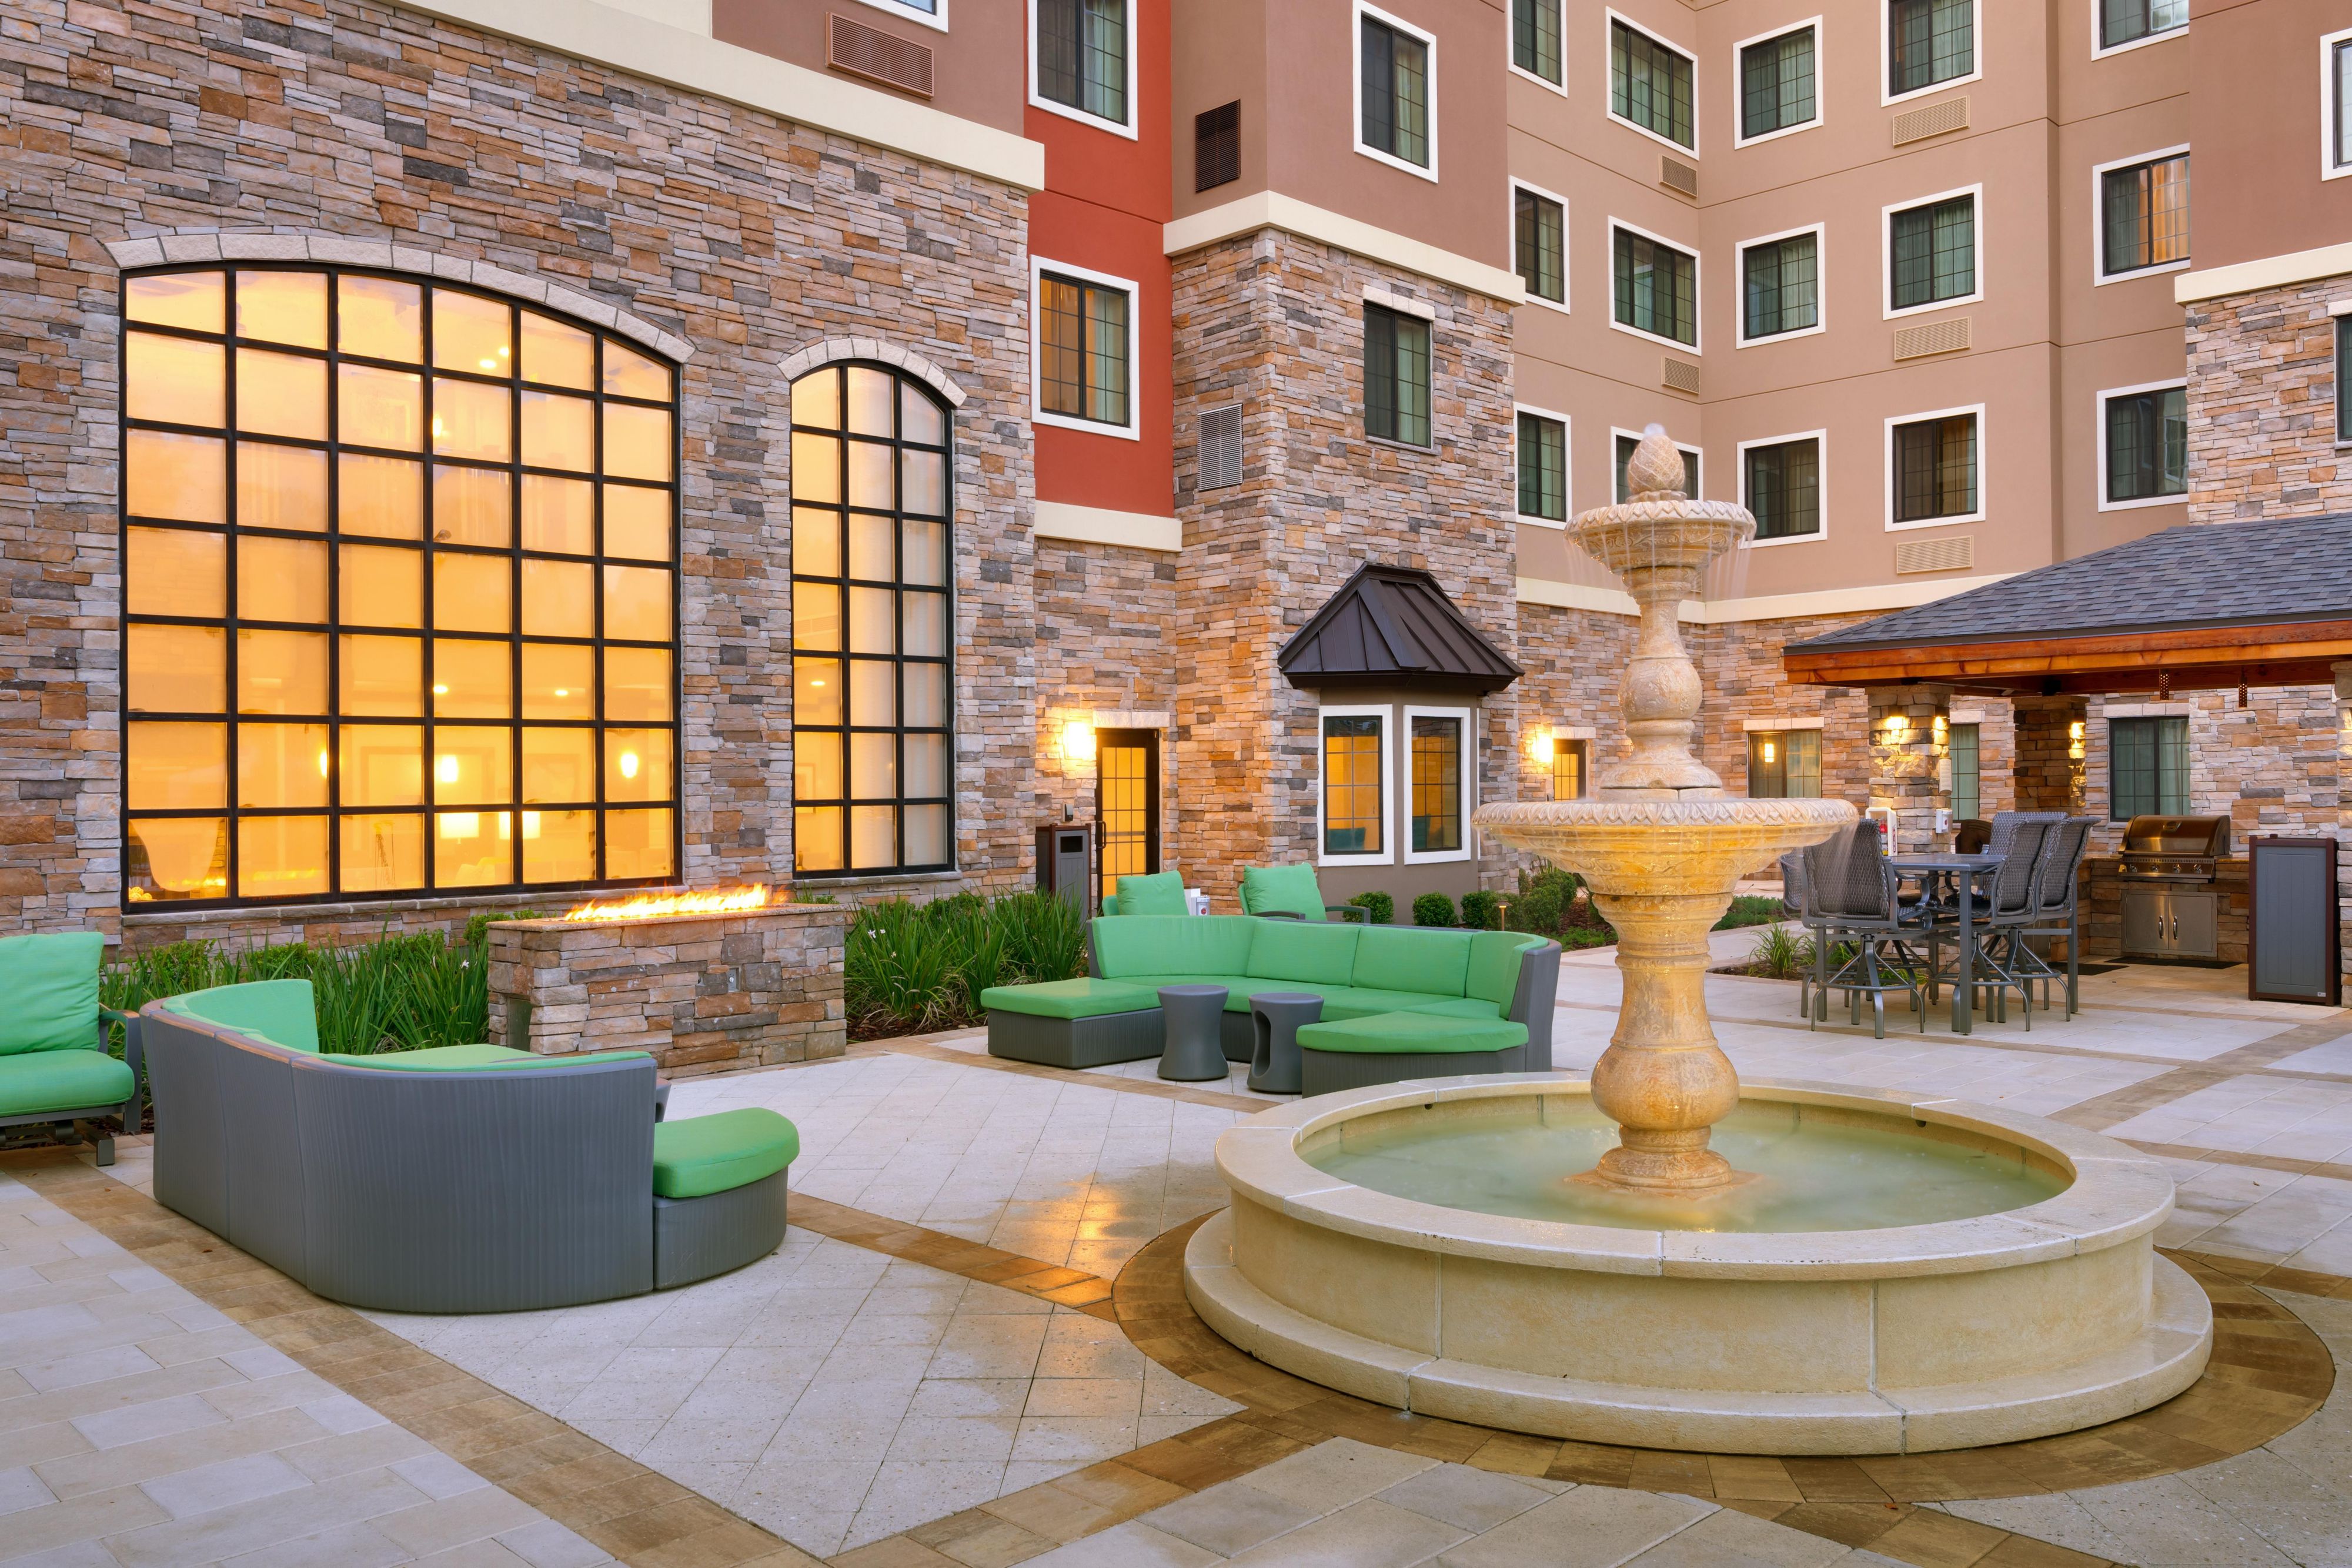 Our resort style patio offers firepit with lots of seating and tables for socializing.